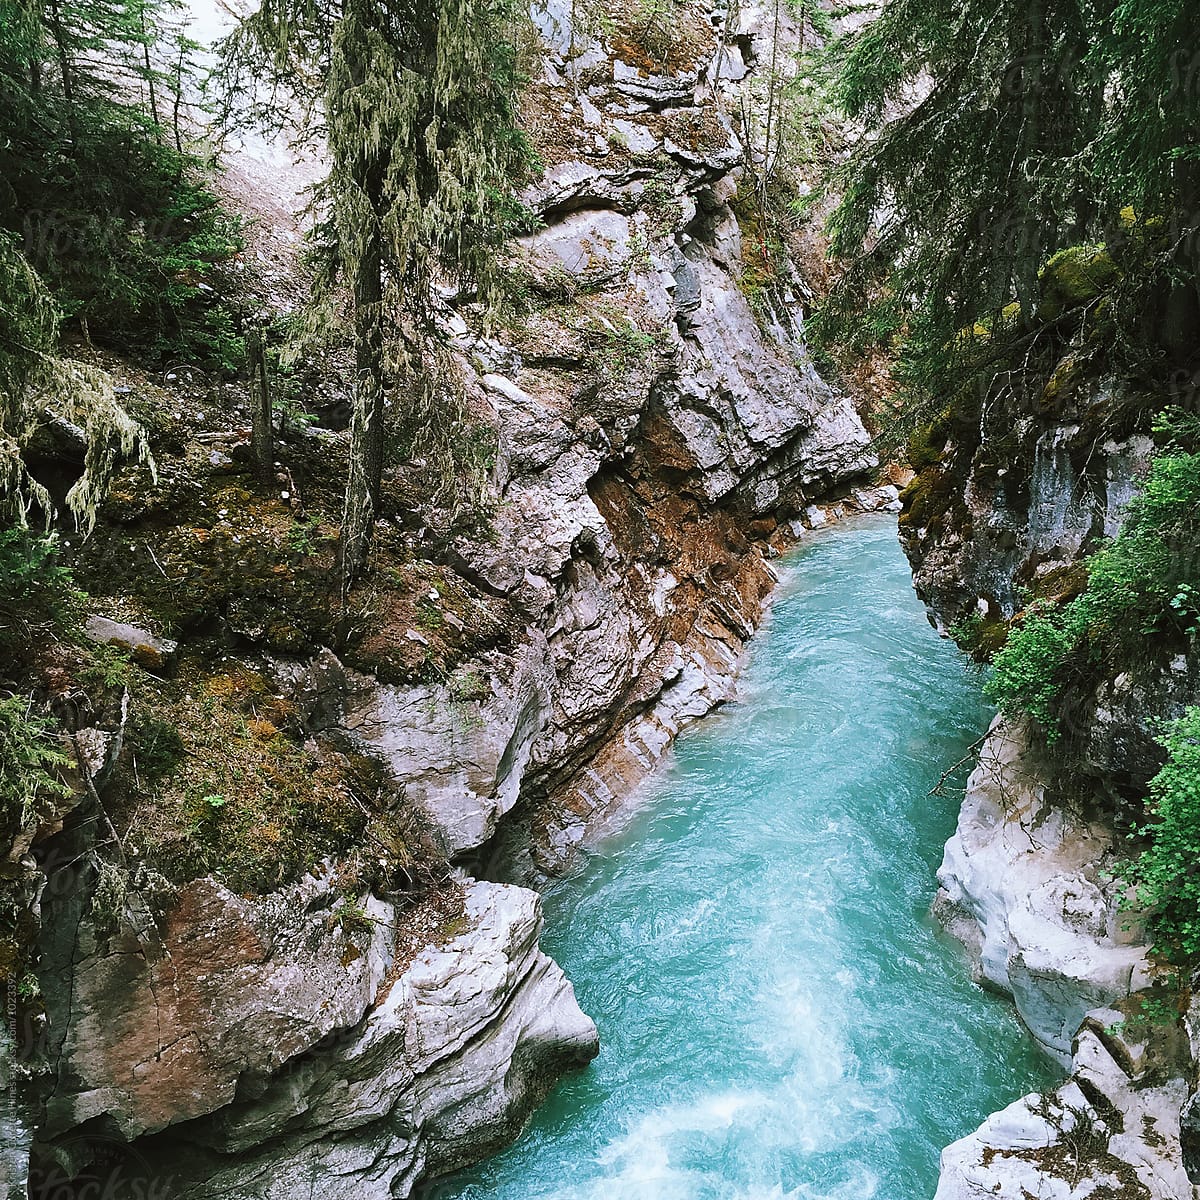 Mobile phone capture of a blue river cutting through a canyon